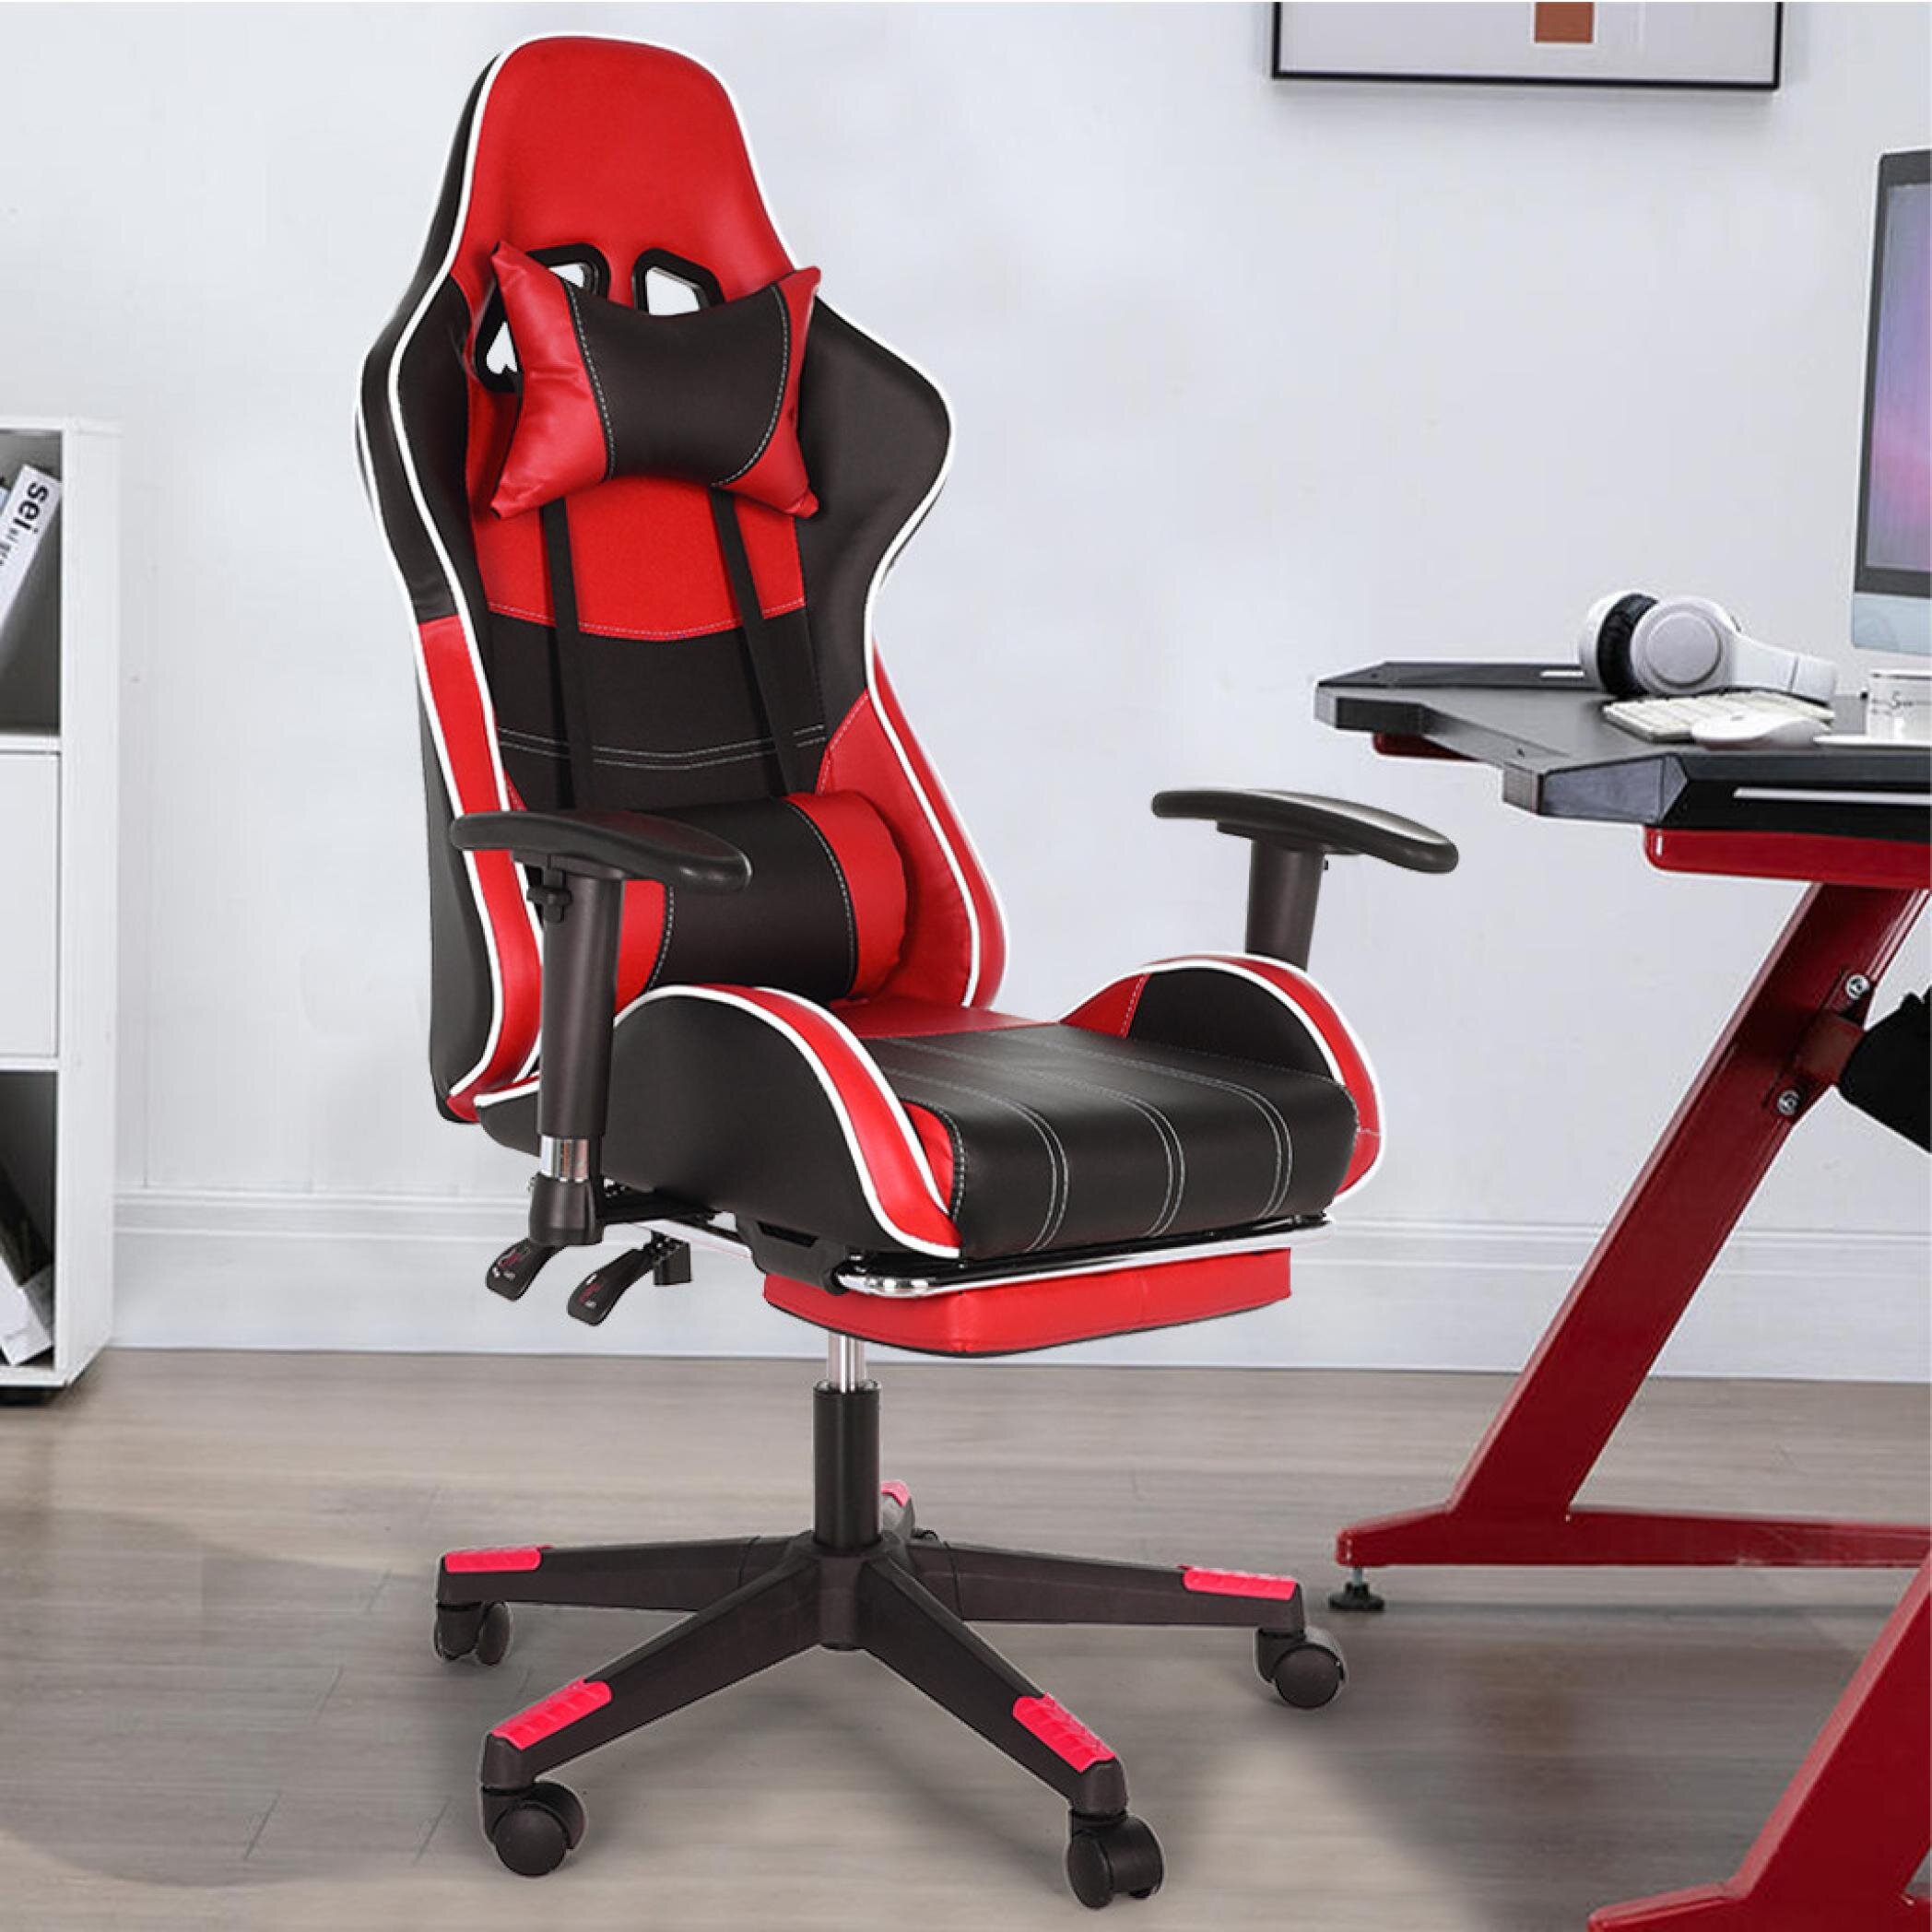 Ergonomic Office Chairs Adjustable Swivel Multifunctional Desk Chair with Headrest and Lumbar Support Video Game Chairs Black & Red Gaming Chair Computer Game Chair 